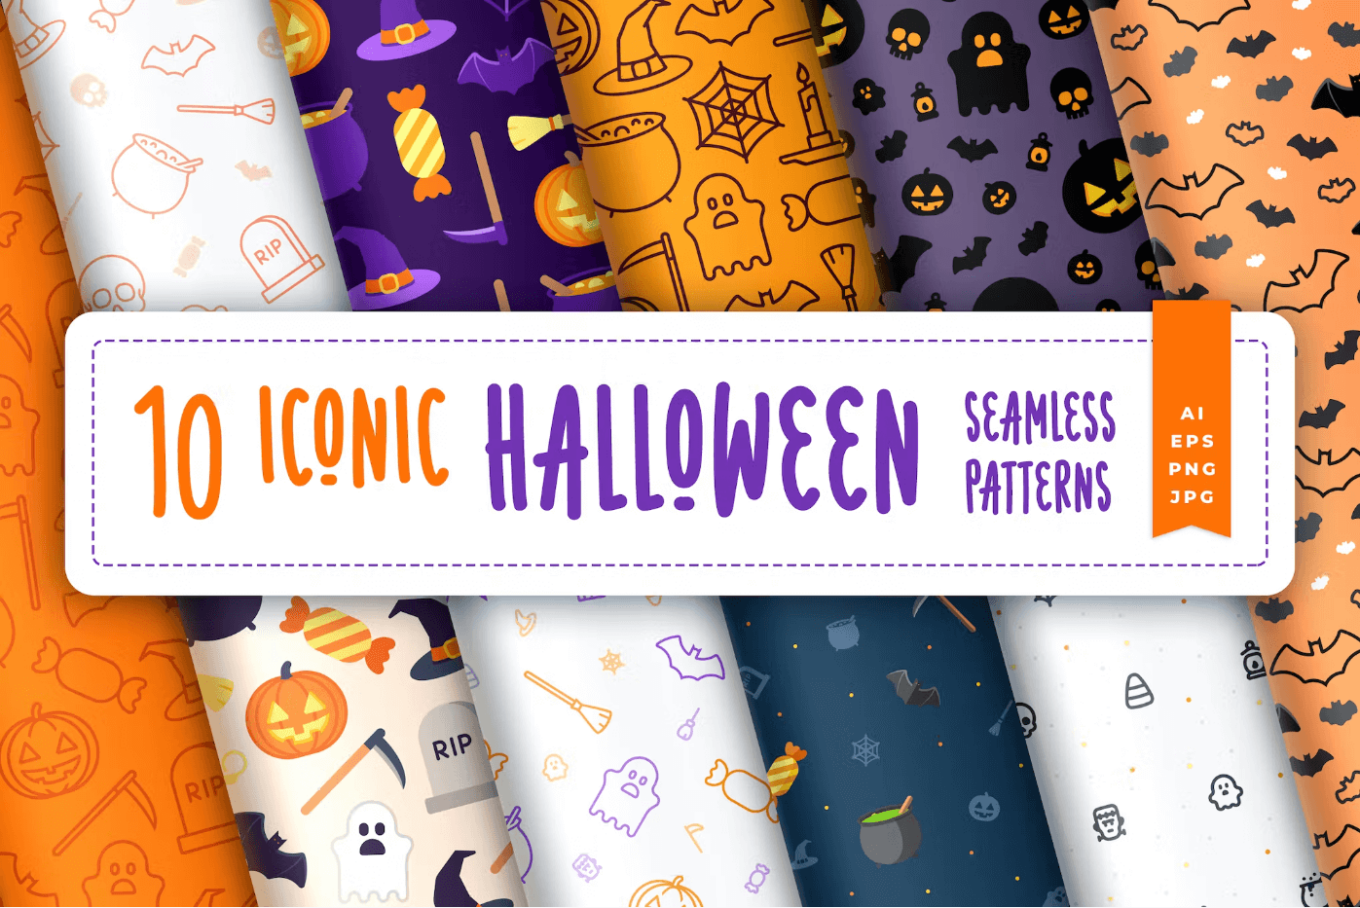 Halloween-themed seamless backgrounds including images and illustrations of pumpkins, ghosts and witches.